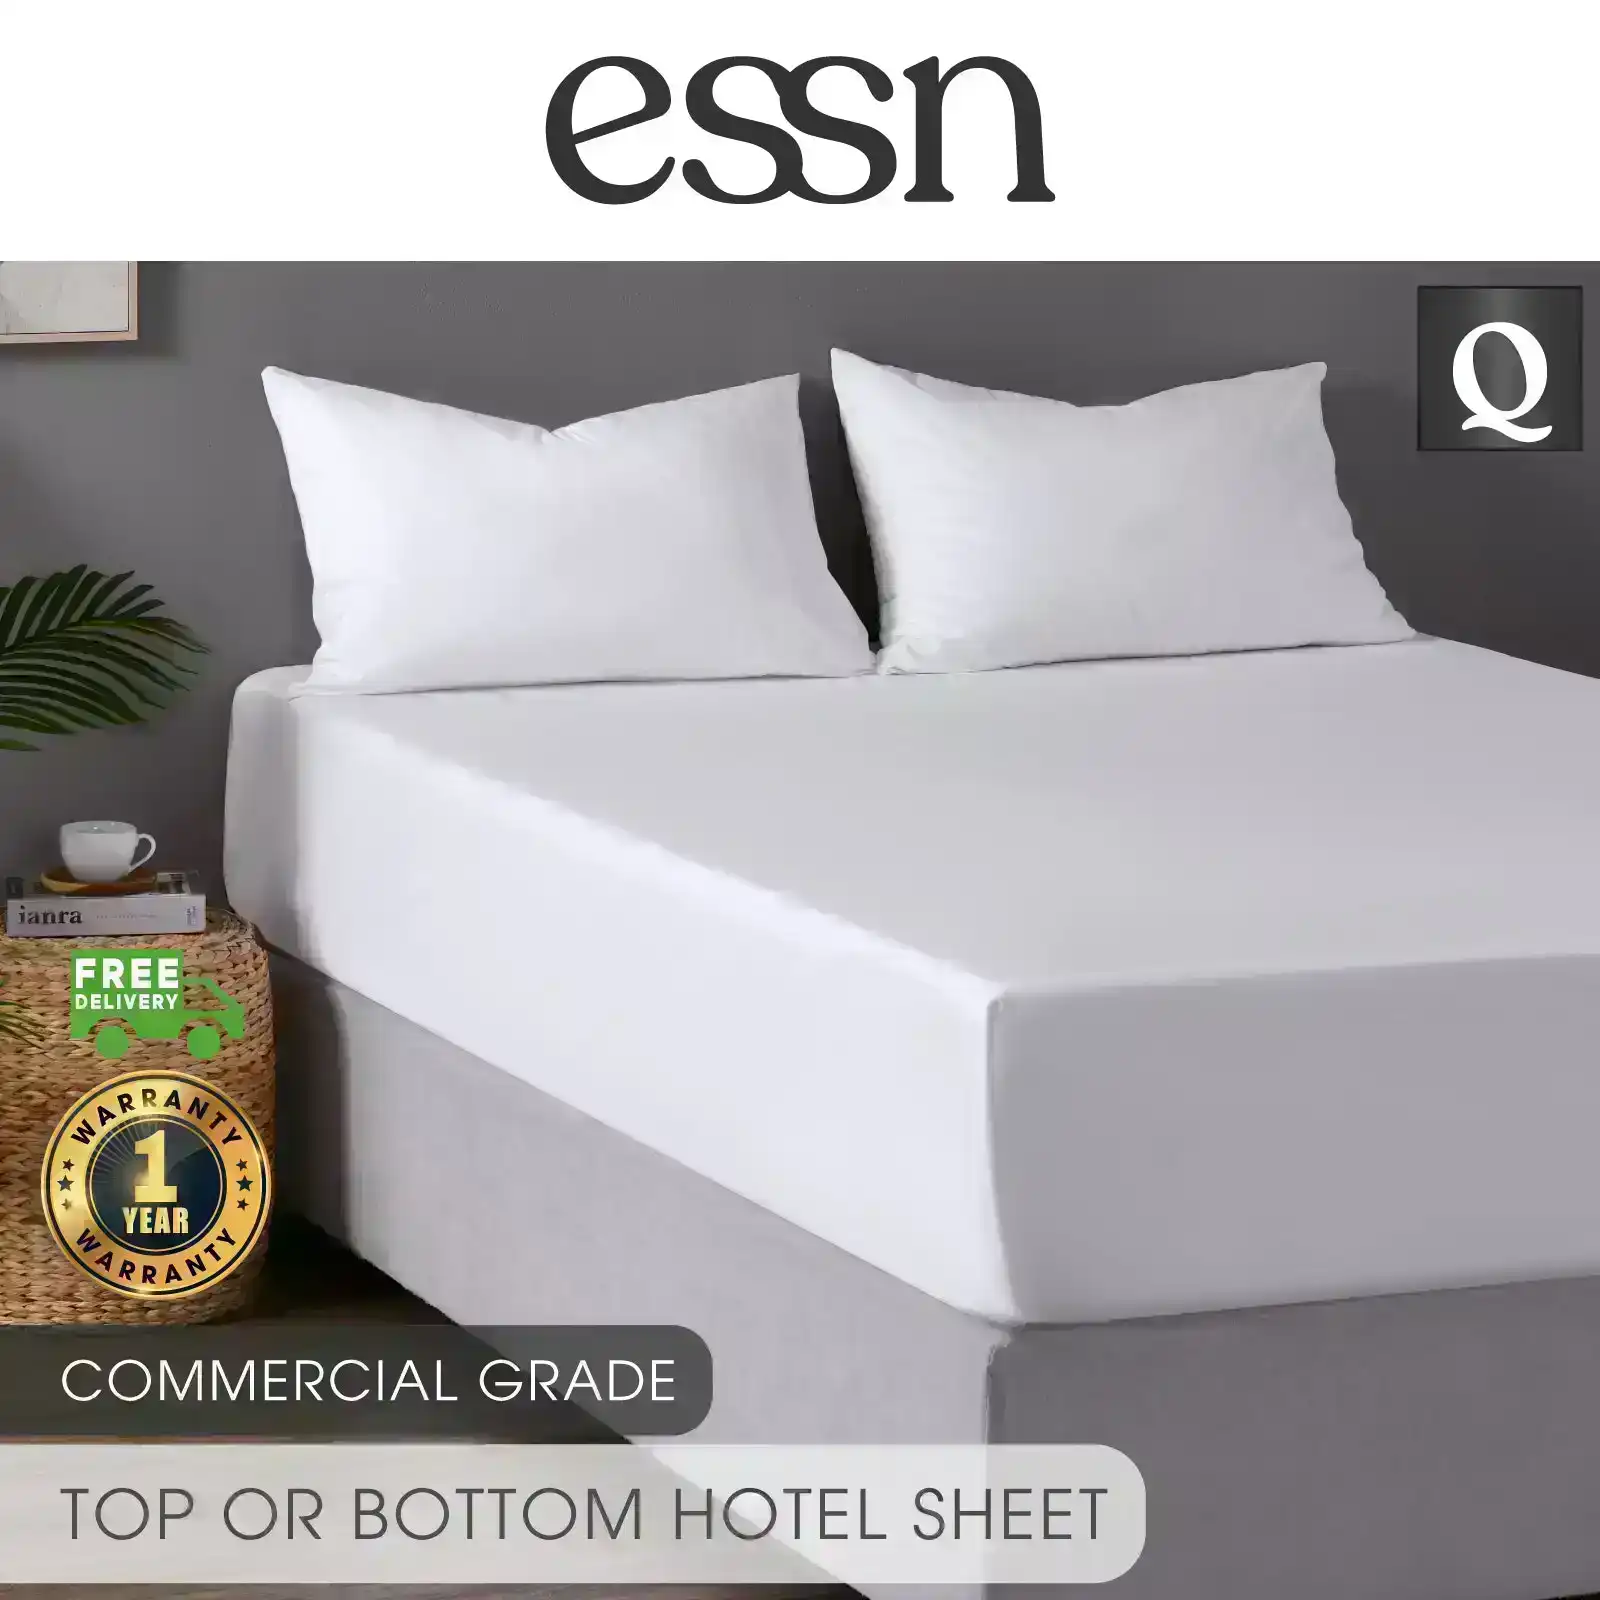 ESSN Commercial Top or Bottom Sheet White Queen Bed 250x305cm